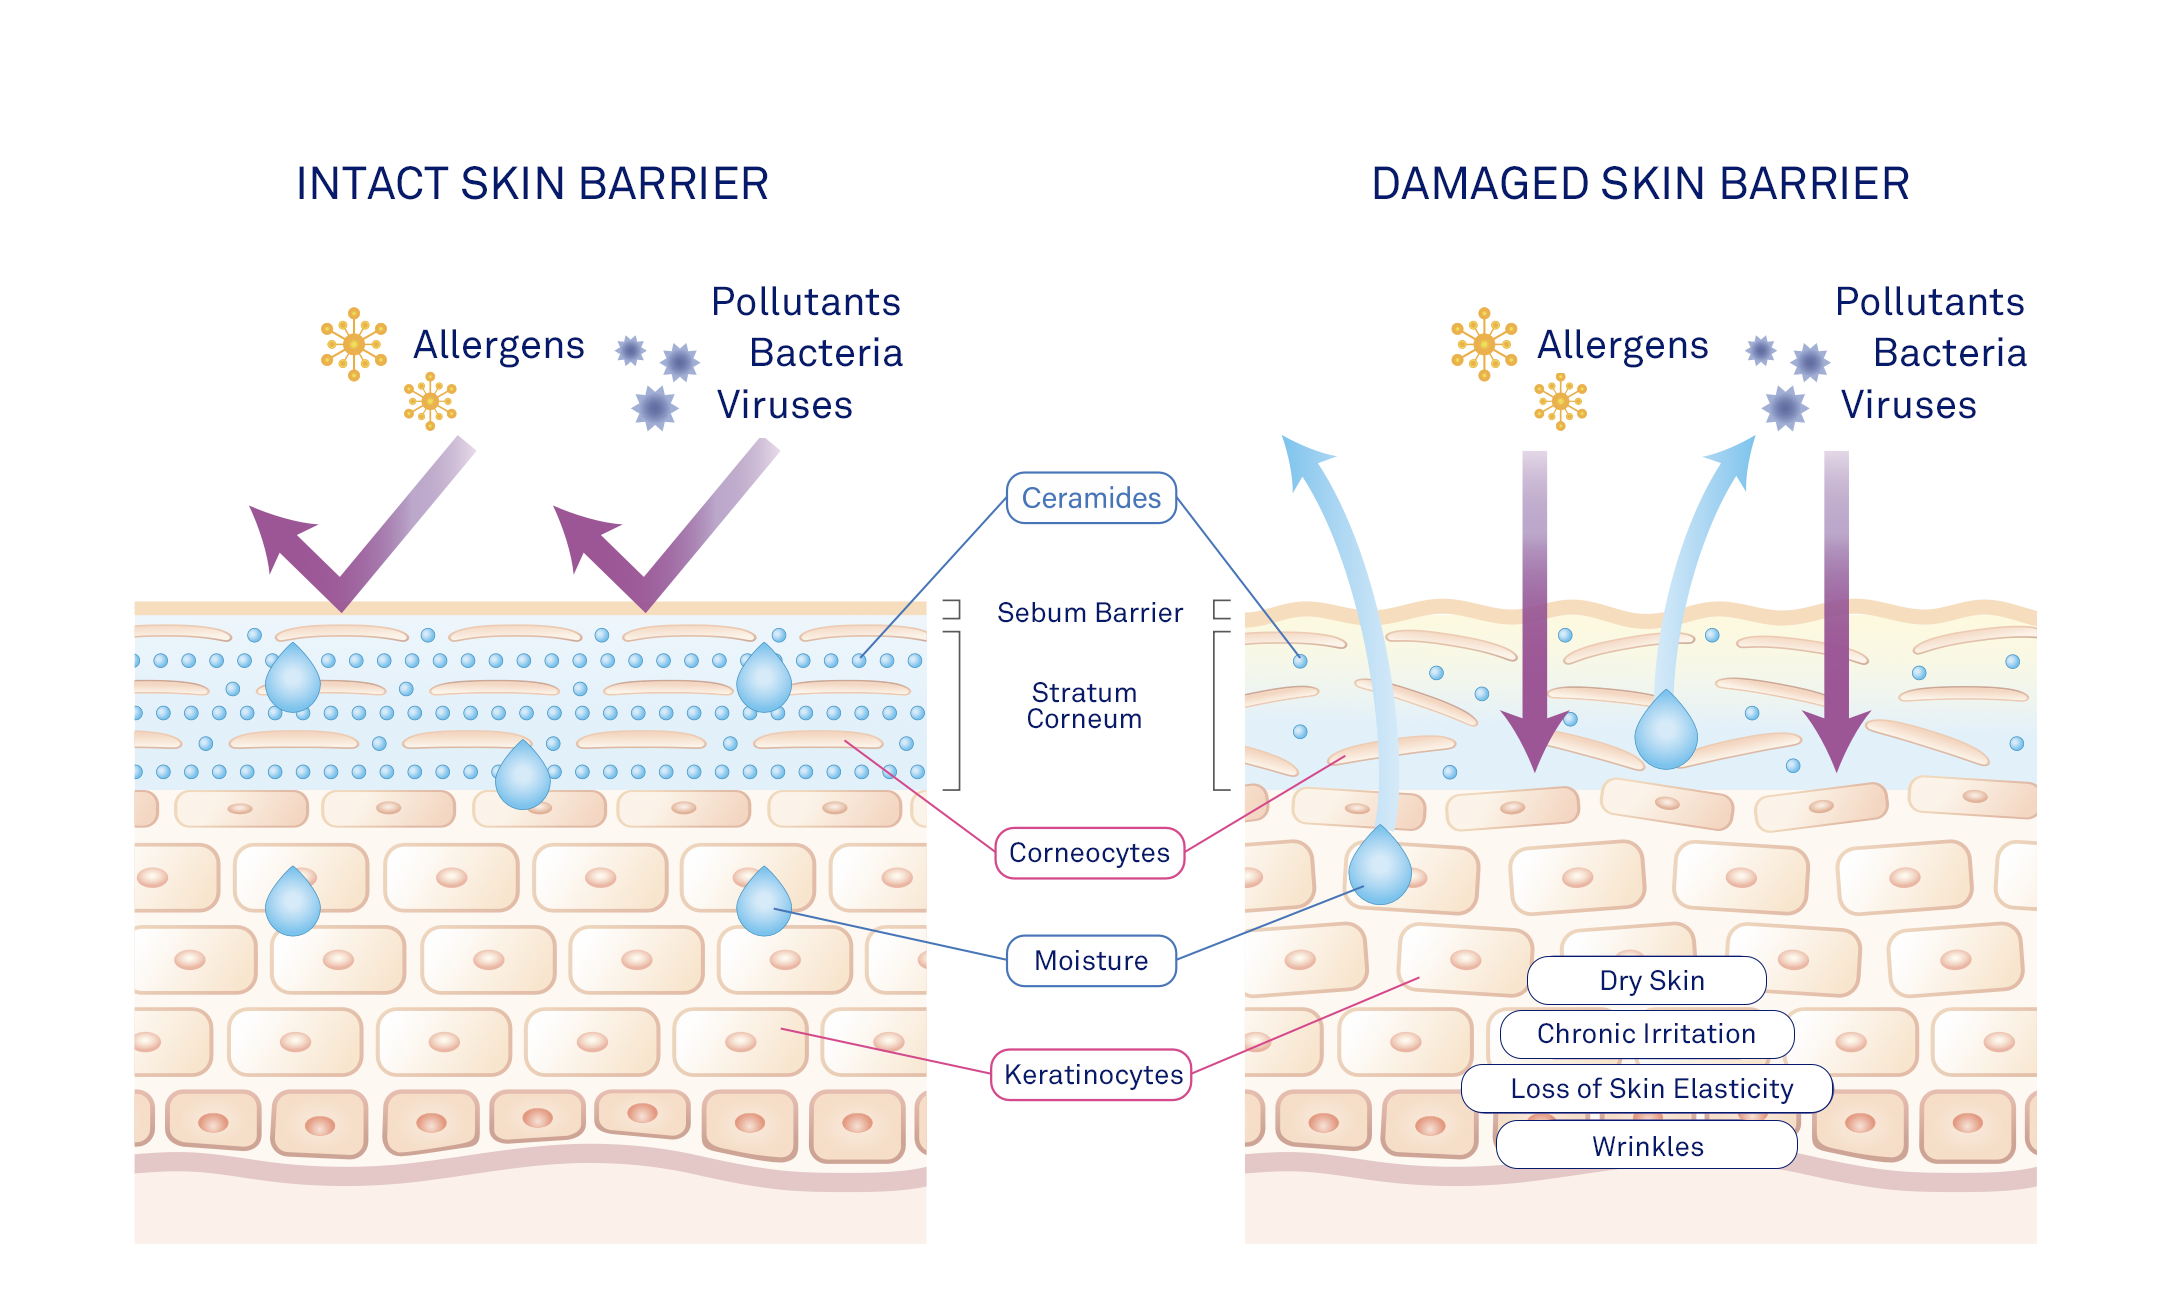 label diagram comparing intact and damaged skin barriers. One side shows intact skin barrier with well-organized skin layers, while the other side shows damaged skin barrier with gaps and disrupted skin layers